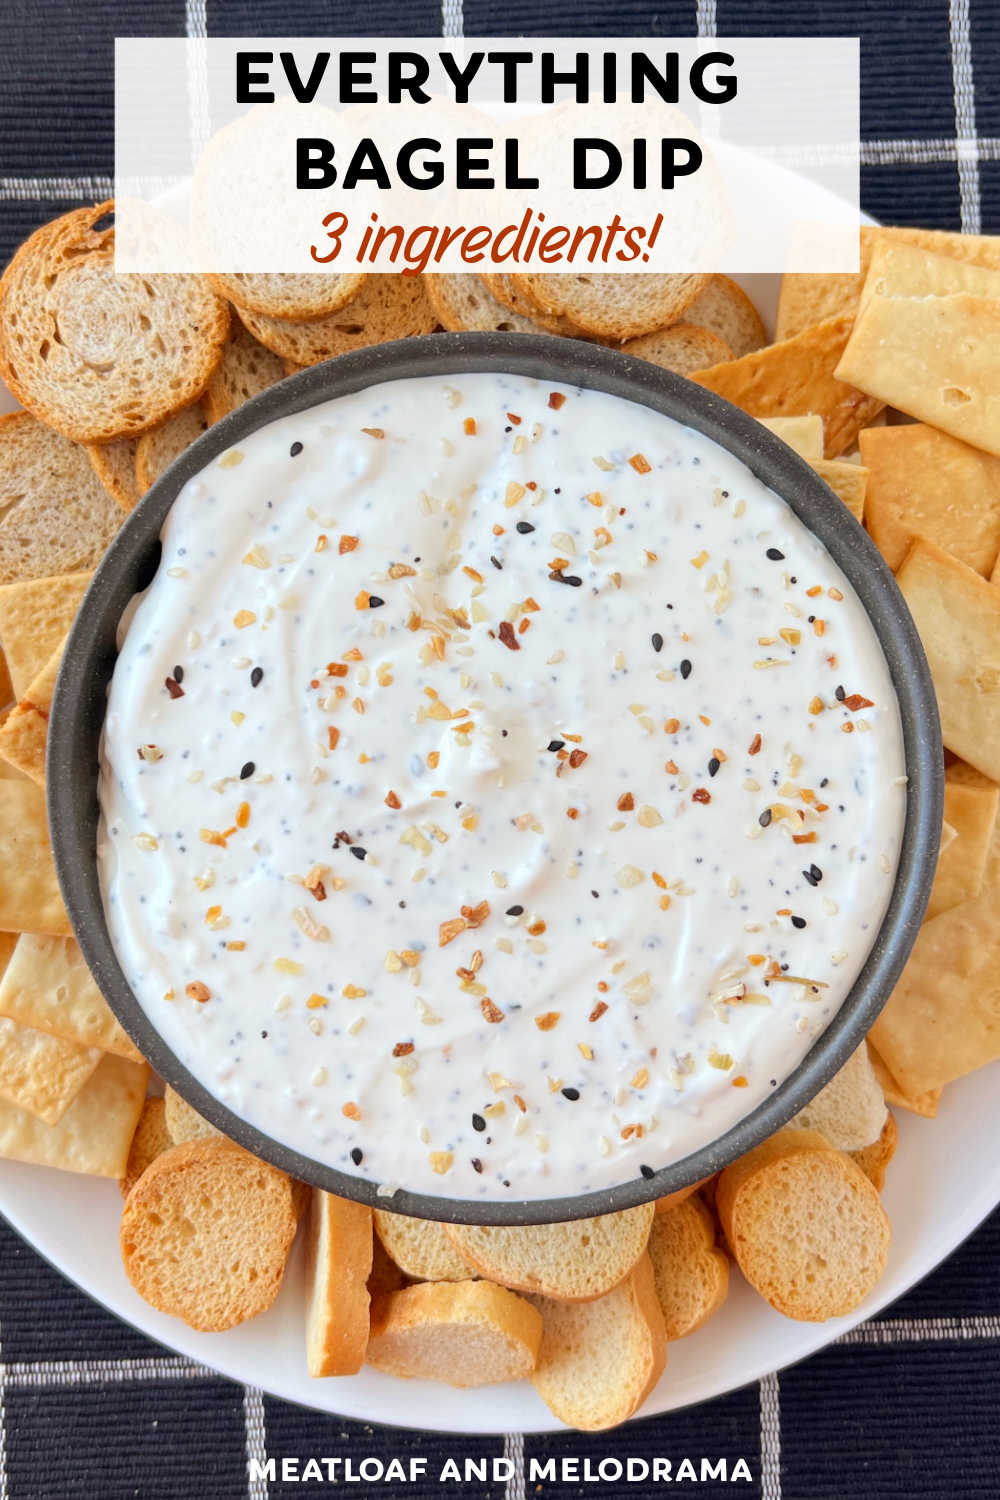 Everything Bagel Dip is a delicious dip made with sour cream, cream cheese and bagel seasoning blend. Only 3 ingredients in this easy recipe that takes minutes to make! Perfect for game day and a delicious party dip. via @meamel